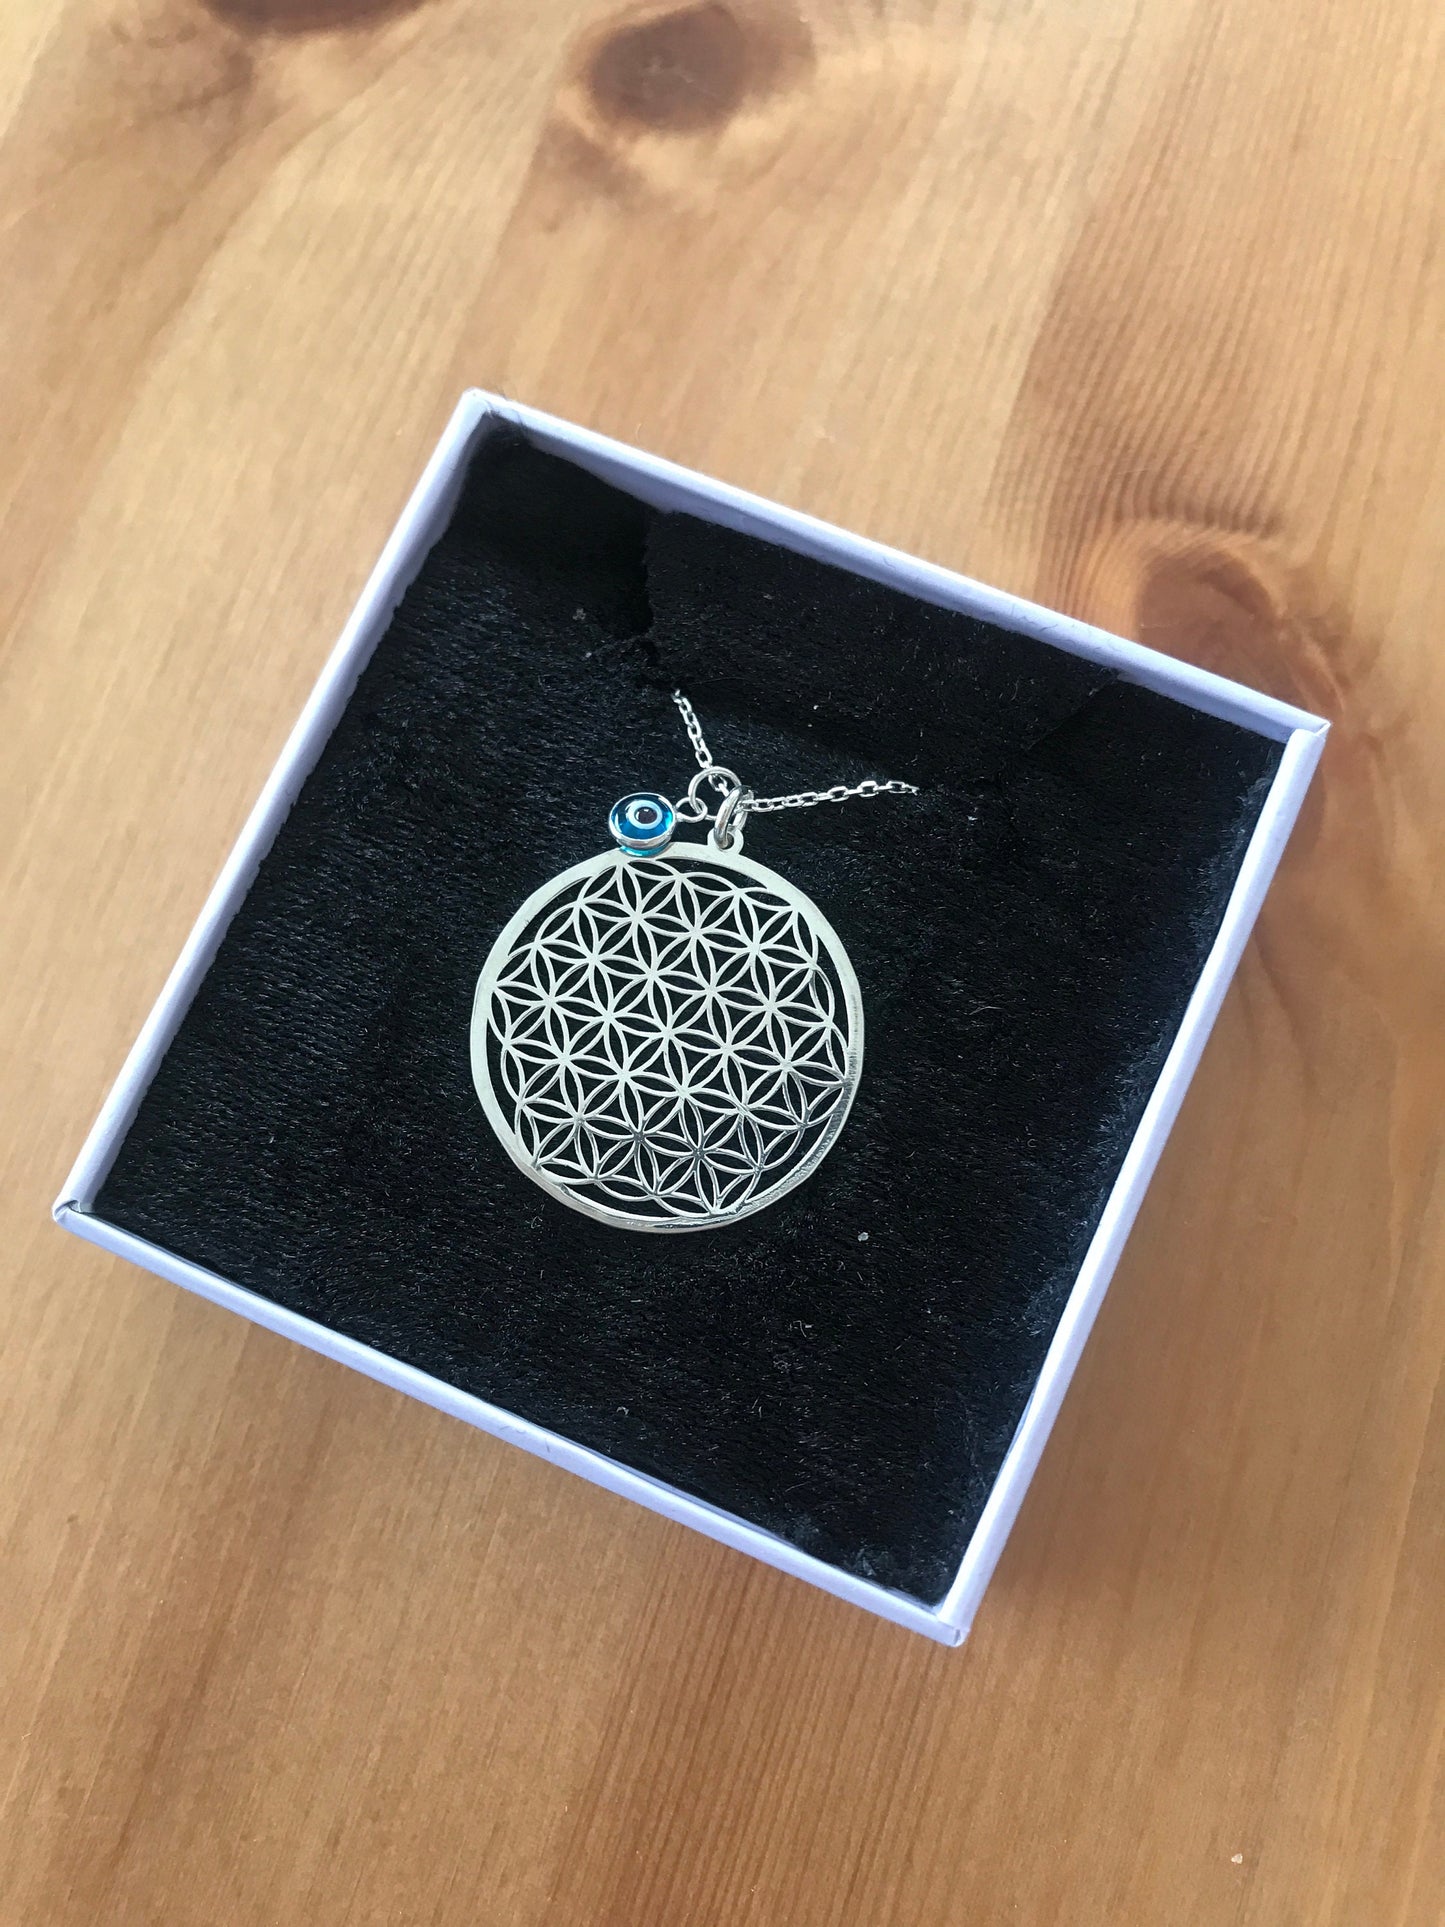 Unisex 925 Sterling Silver Flower of life Necklace